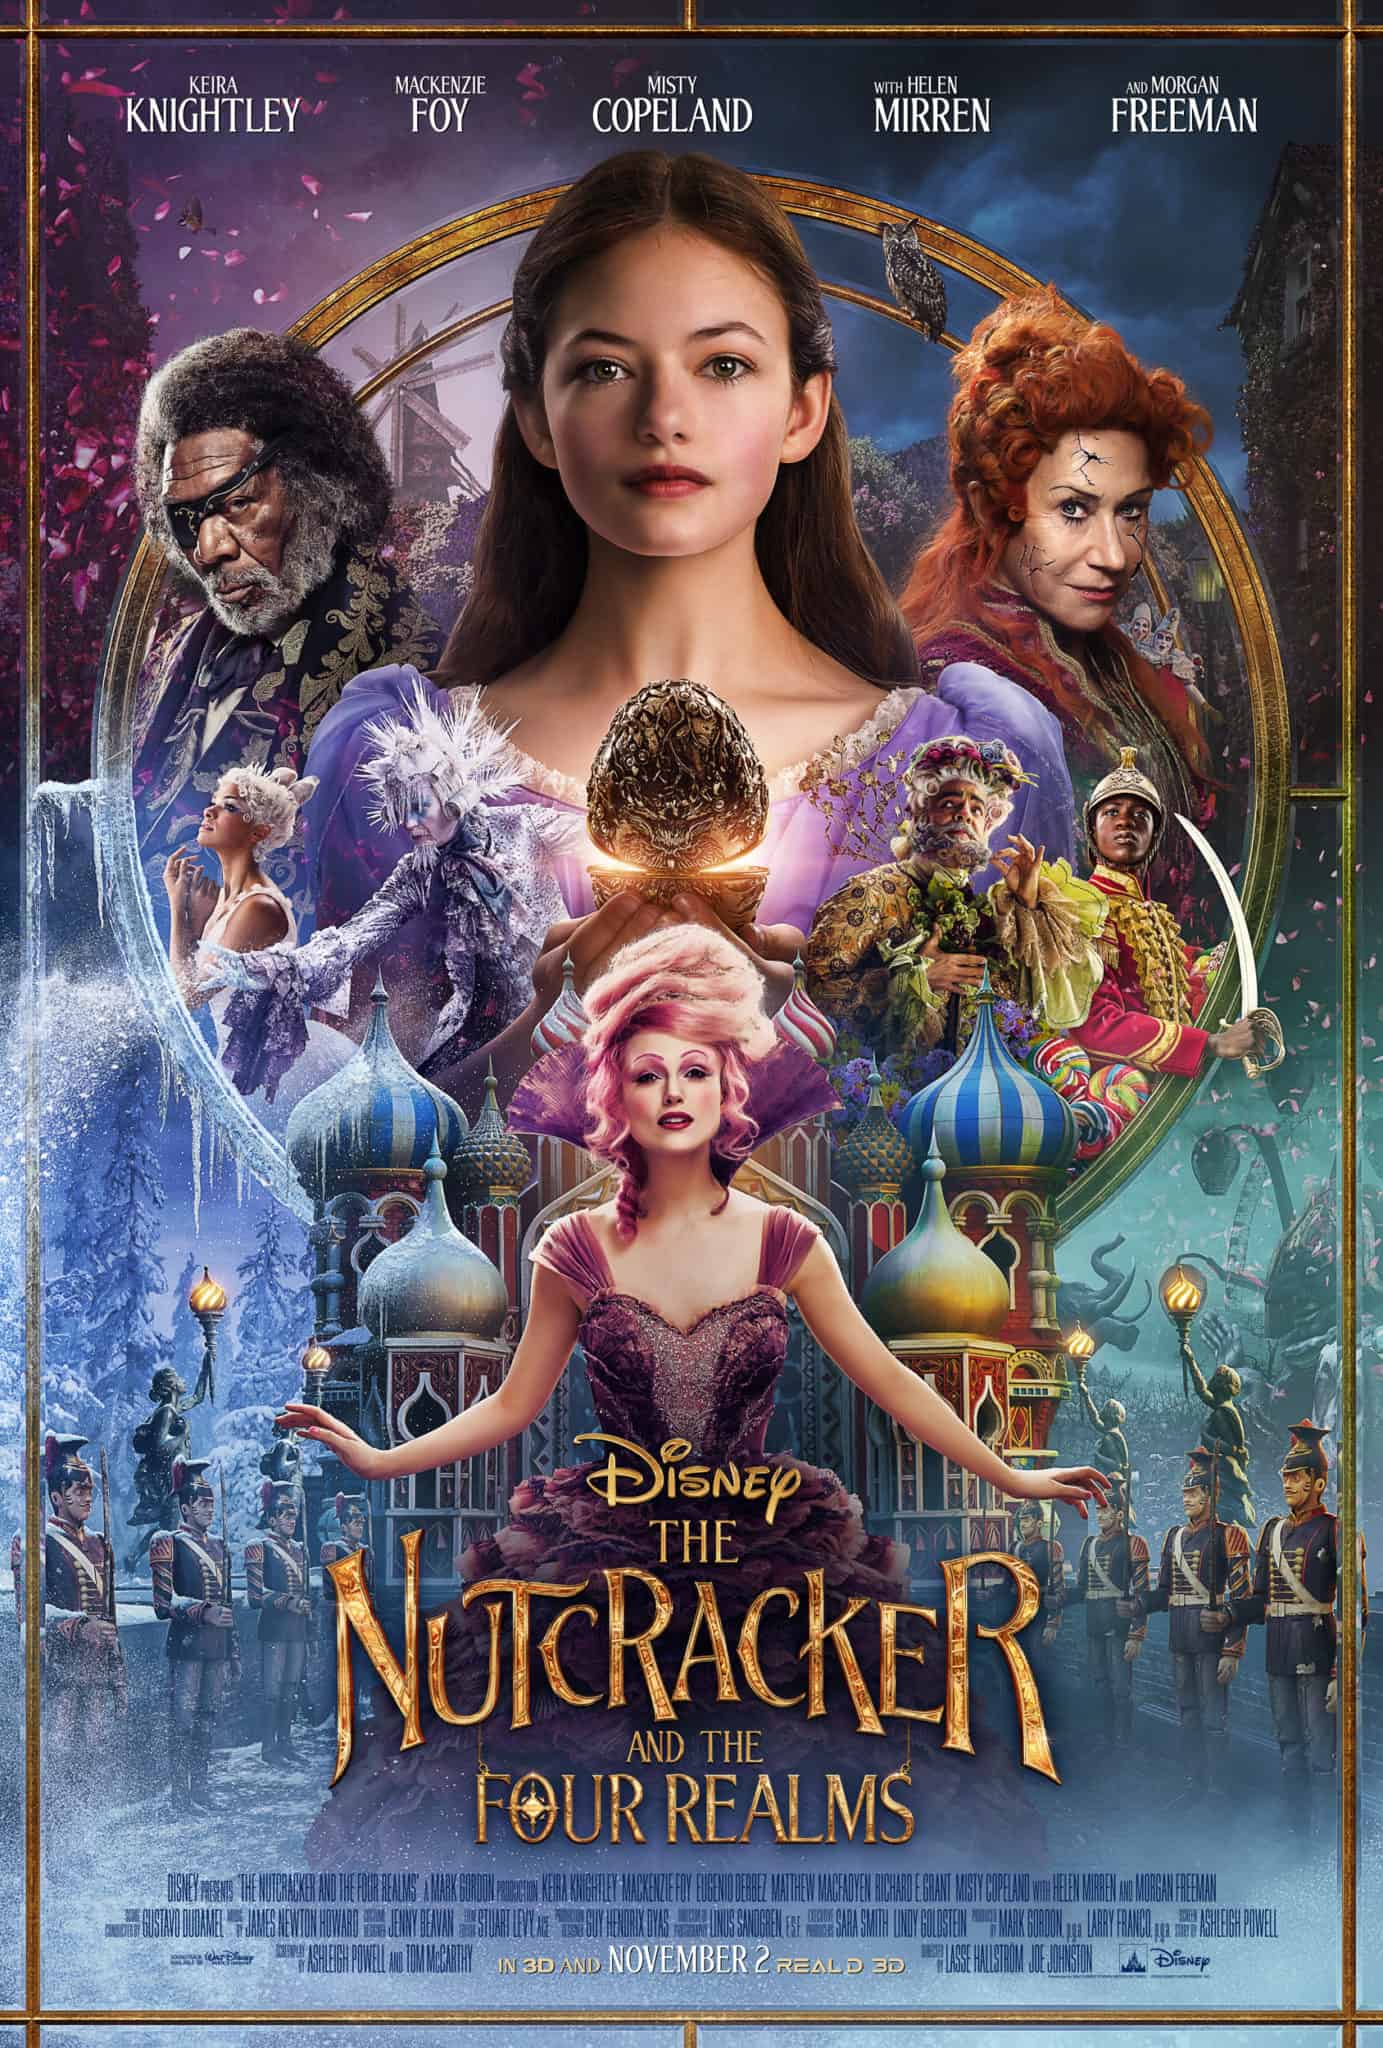 Christian Movie Review for Parents - Disney's Nutcracker and the Four Realms